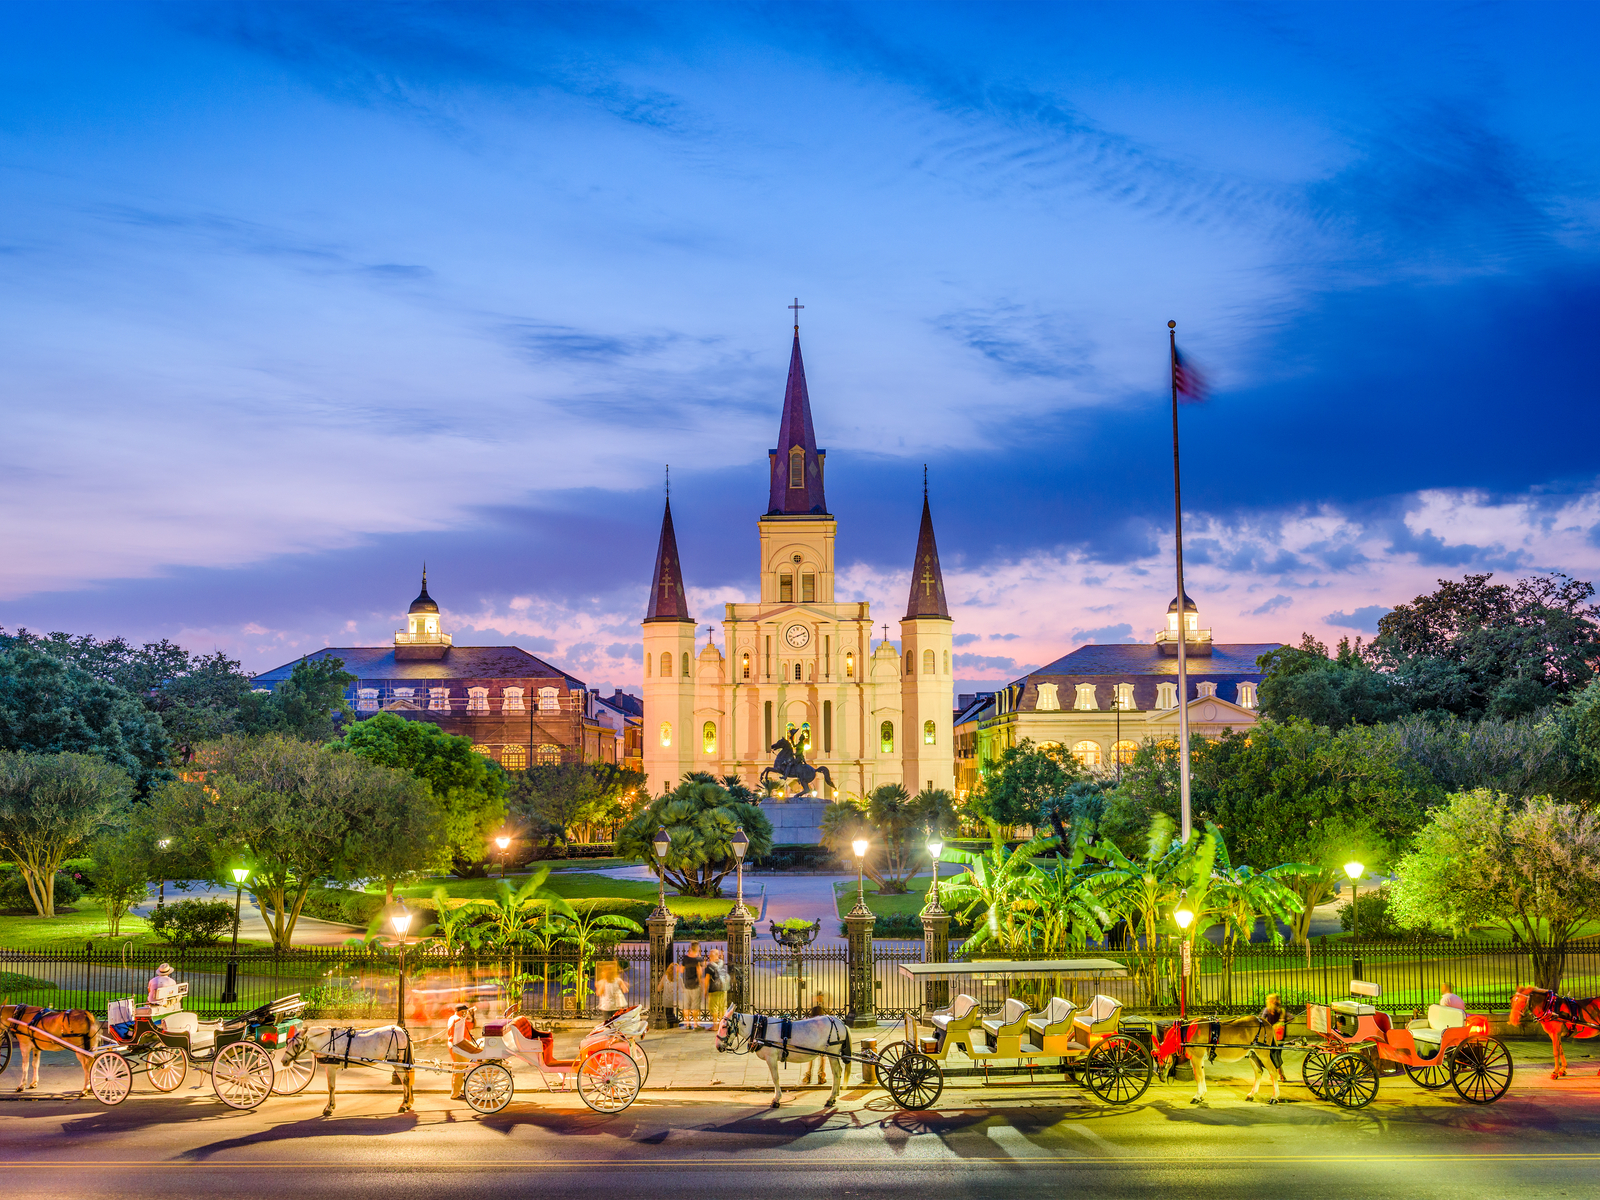 St. Louis Cathedral pictured during the best time to visit New Orleans